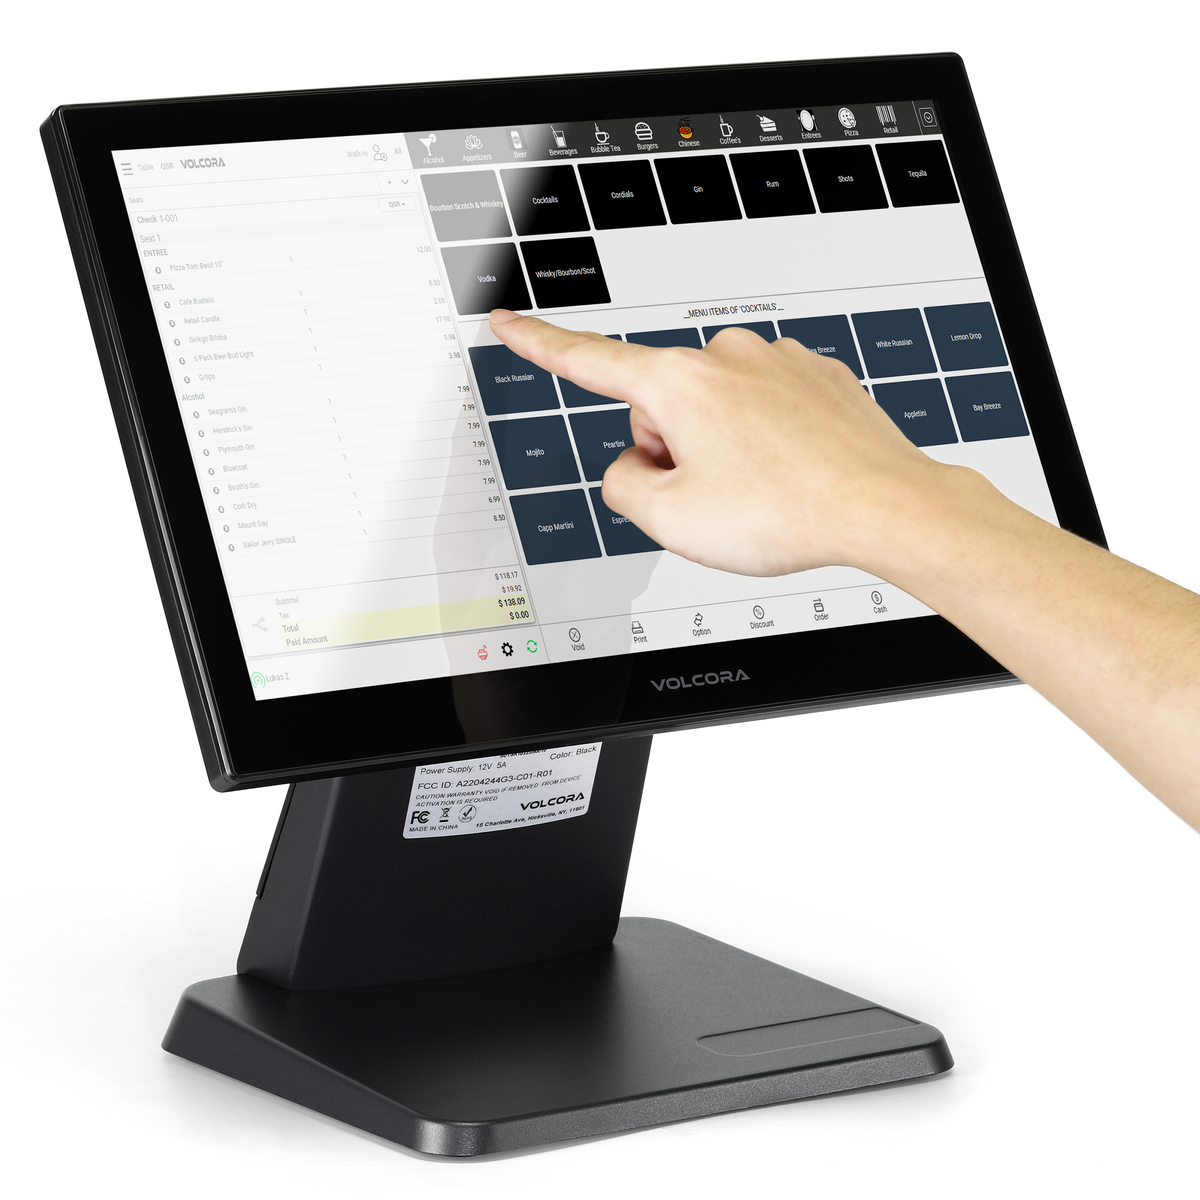 Volcora Point-of-Sale Terminal - Windows 11 Professional